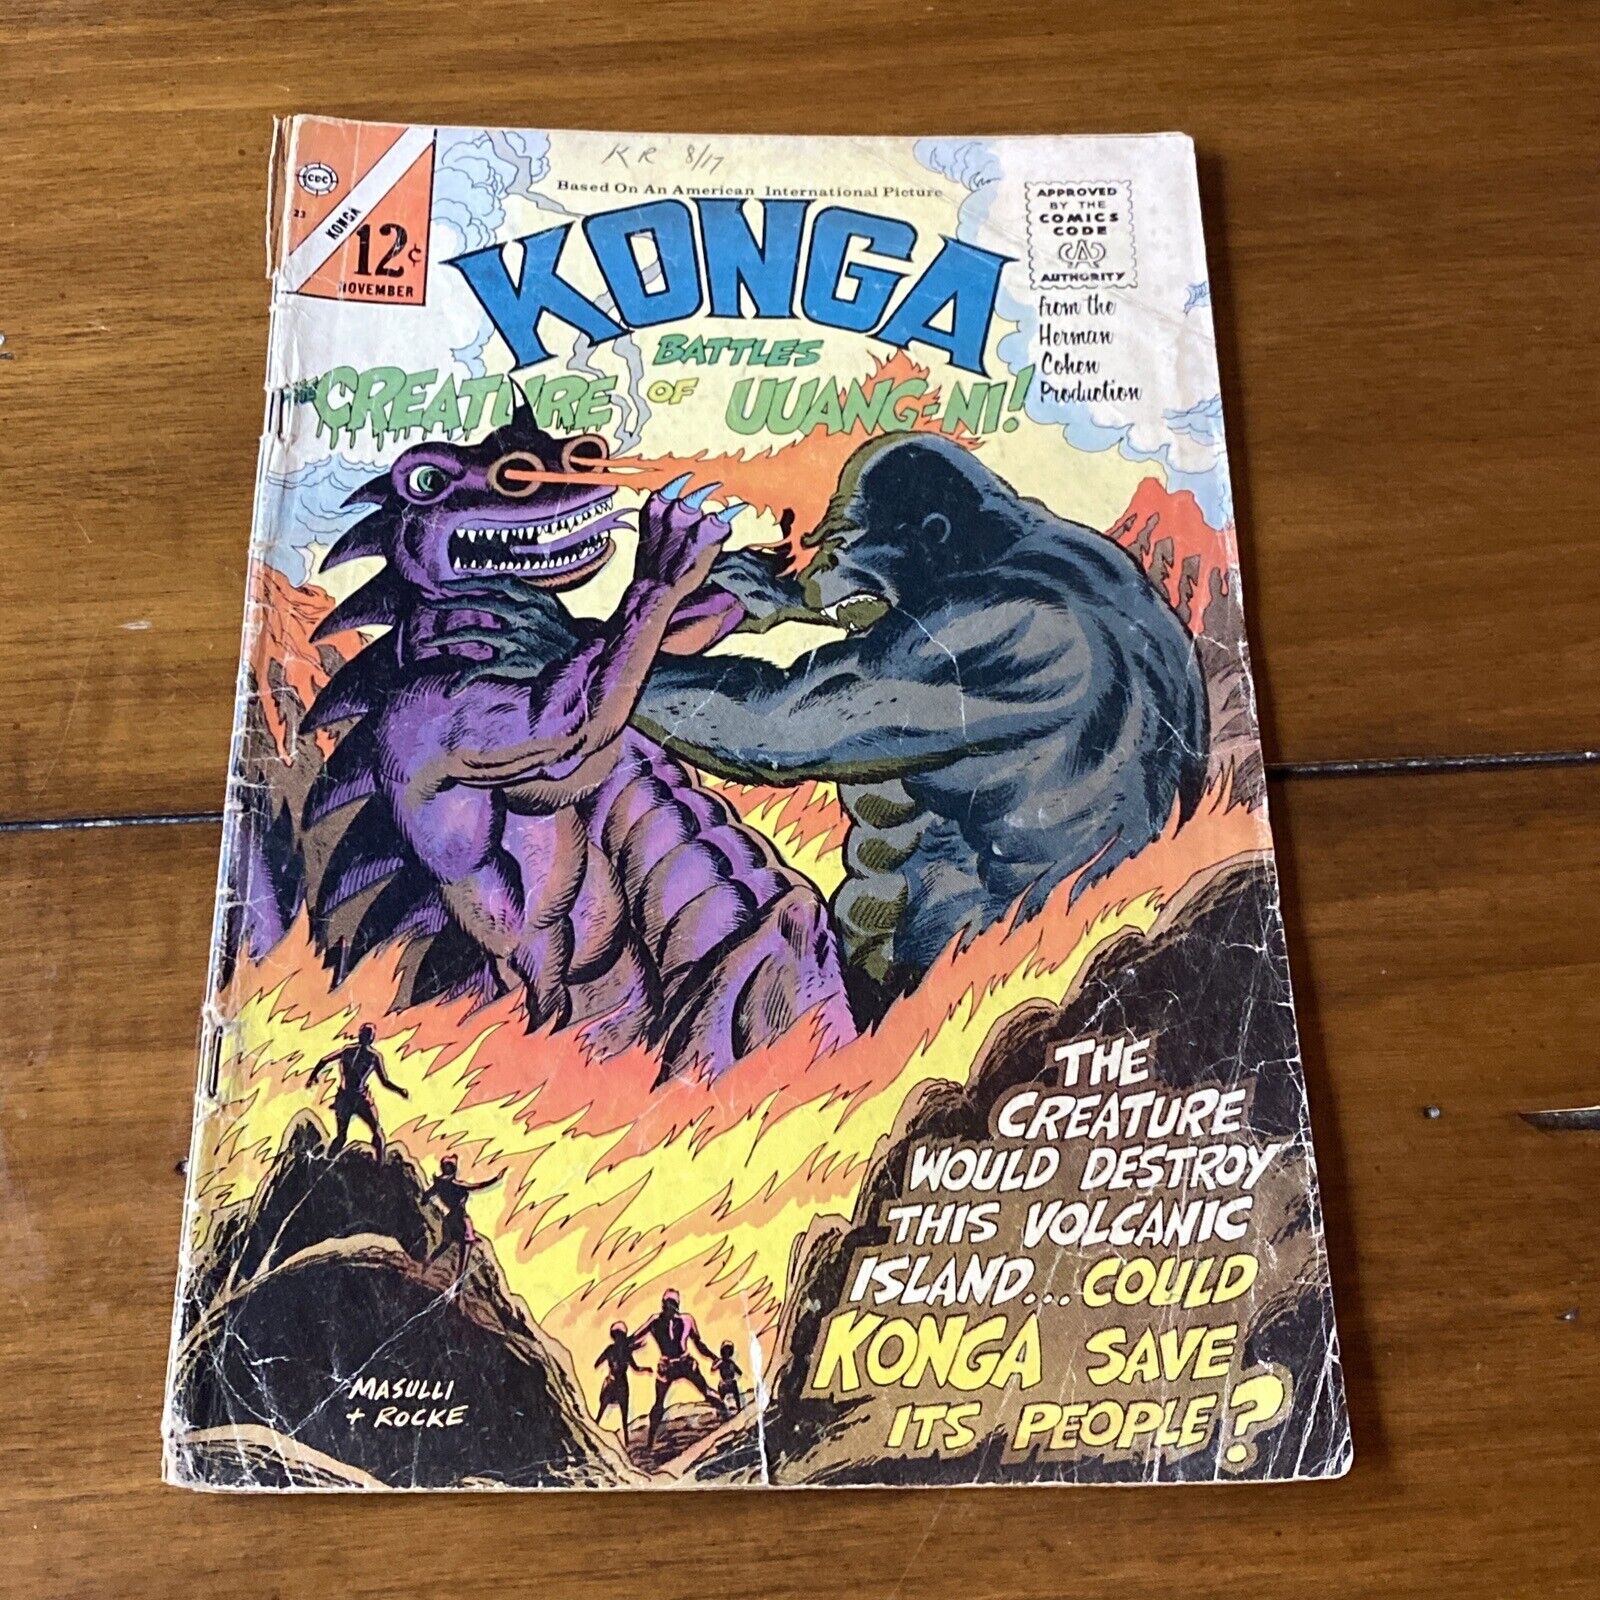 1965 CDC Konga Battles The Creature Of Uuang-in Comic Vol. 1 No.23 Vintage Rare